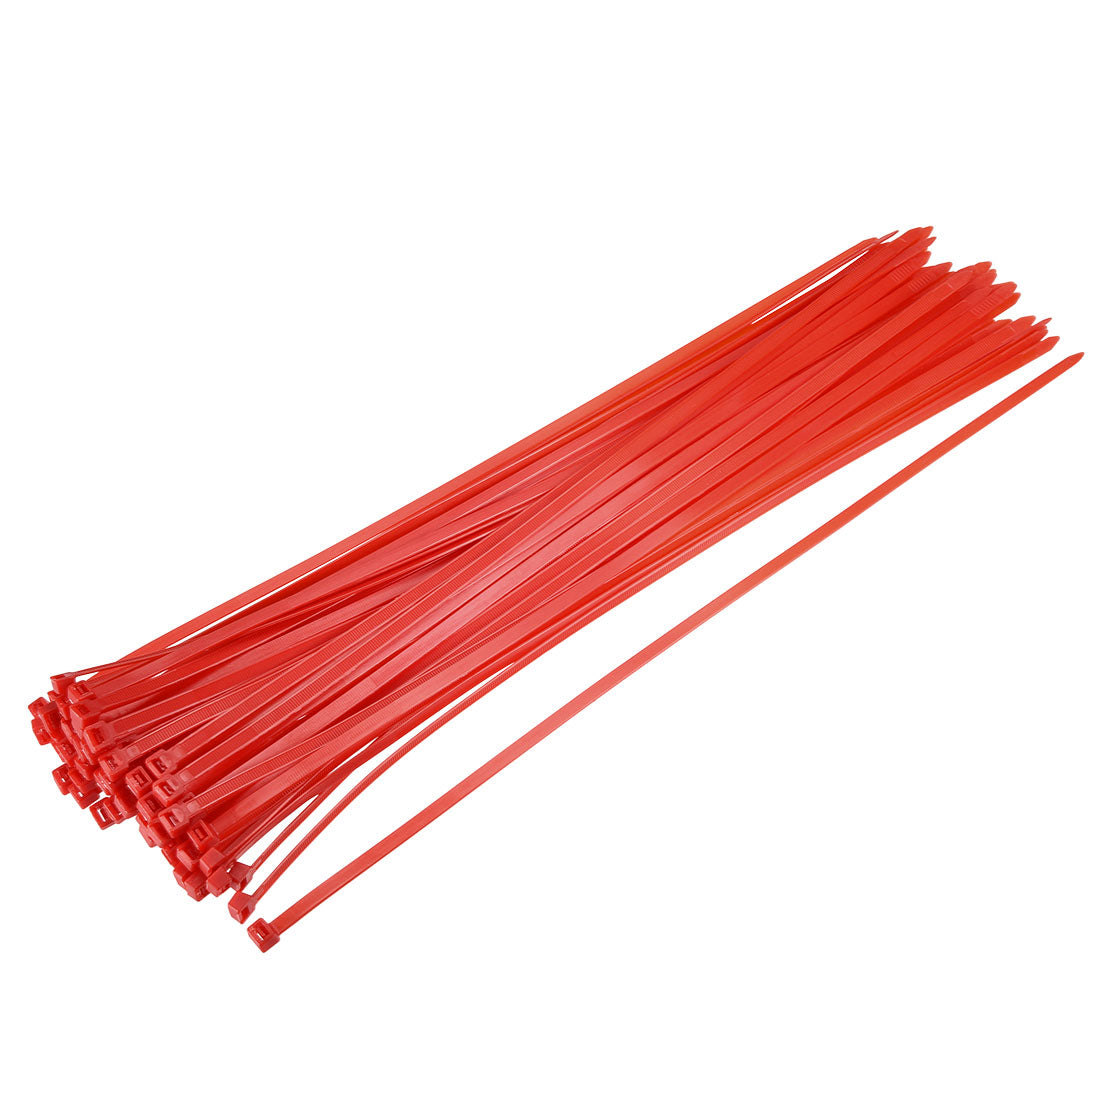 uxcell Uxcell Cable Zip Ties 500mmx4.8mm Self-Locking Nylon Tie Wraps Red 40pcs